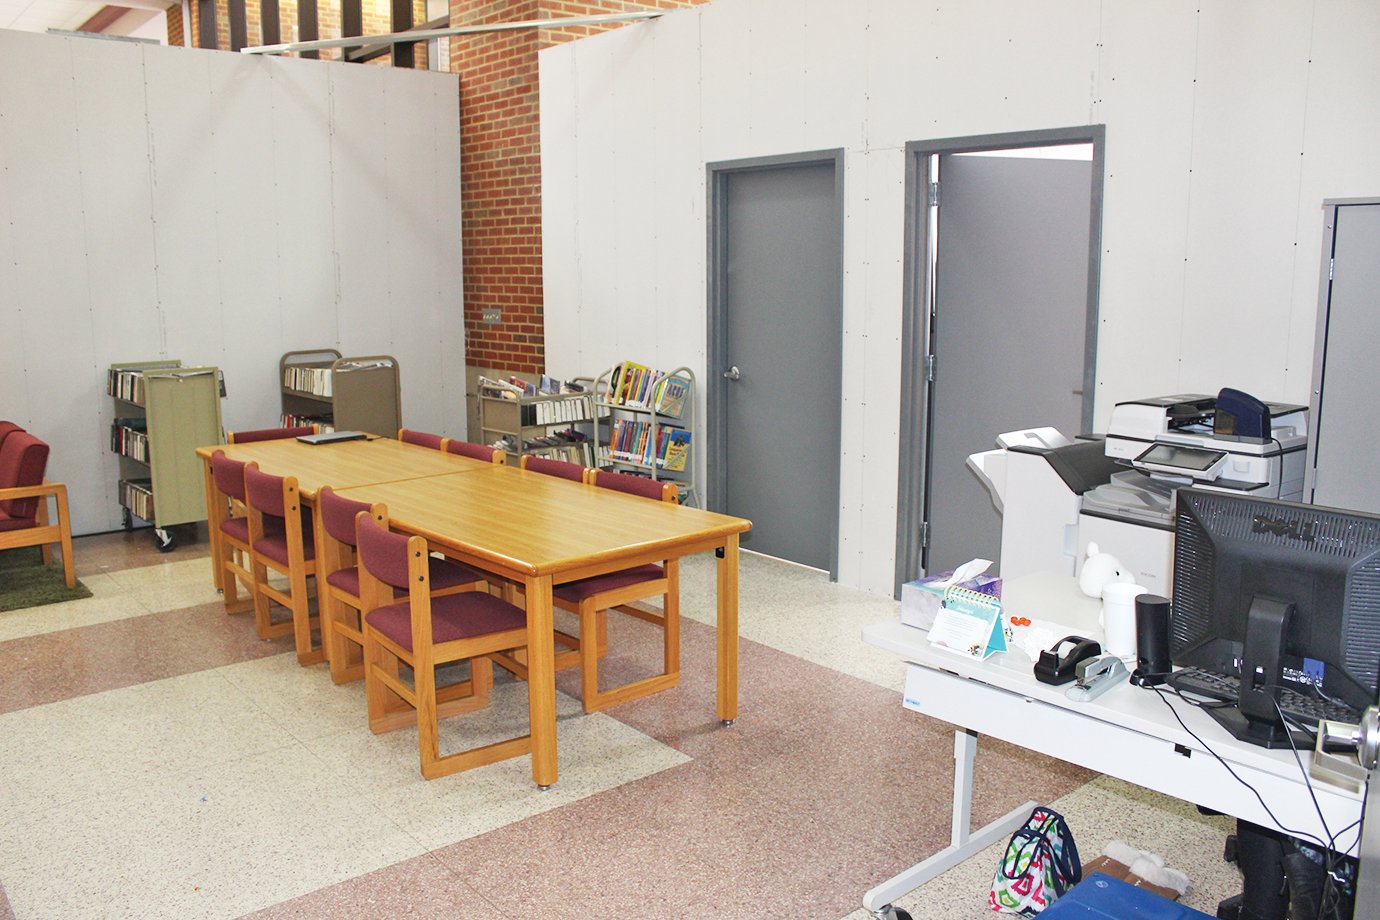 Administrators at Crawfordsville High School have had to make room for adjustment during as renovations are performed. The school's media center, seen here, exists in a make-shift room at the entrance.